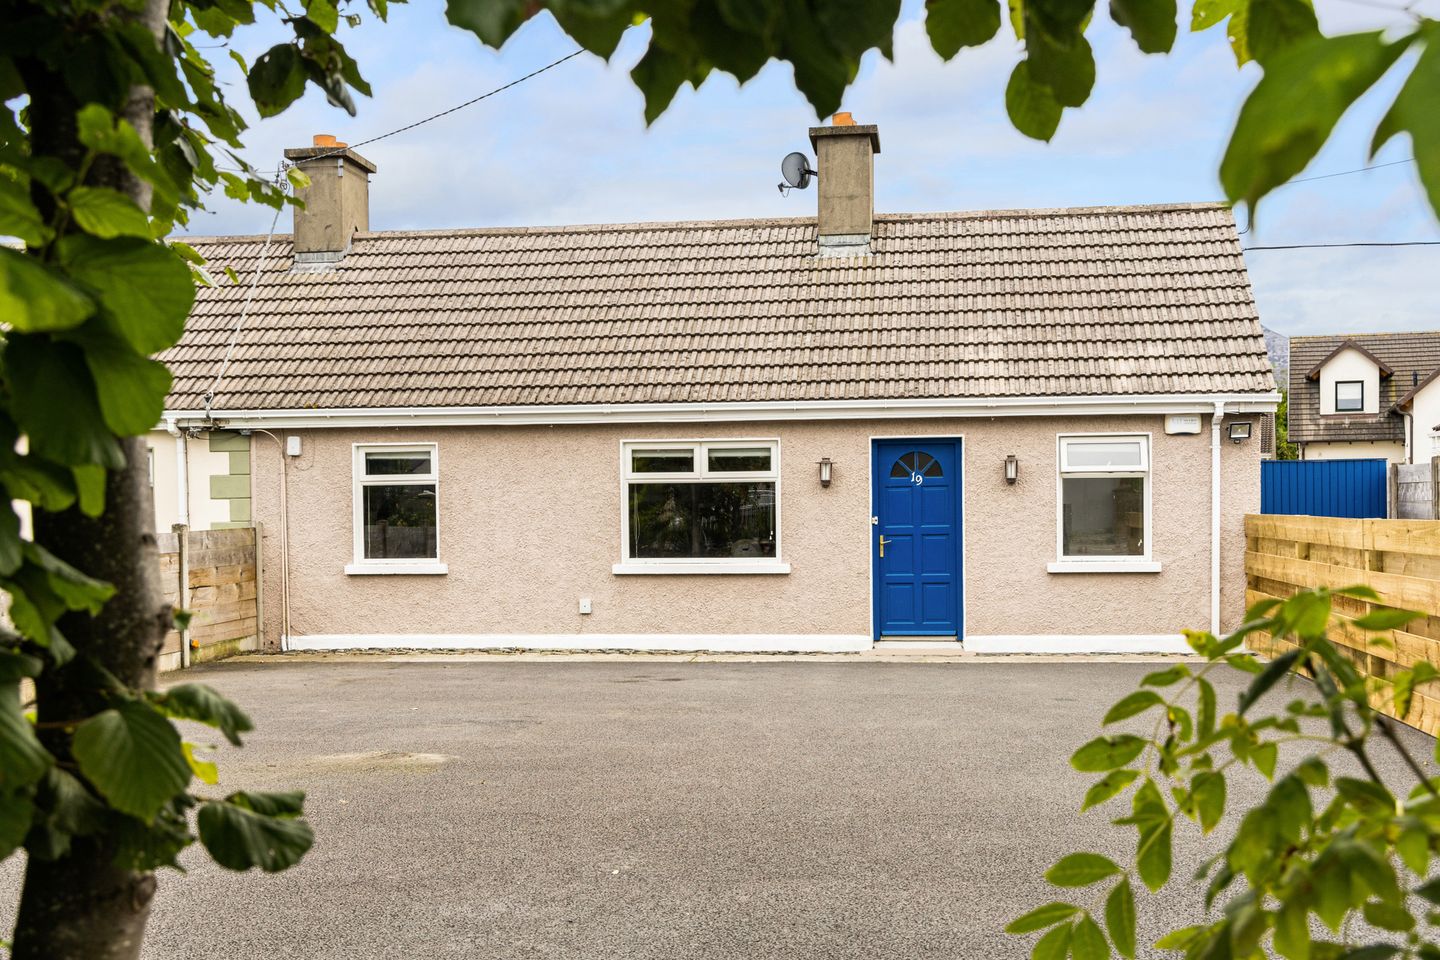 19 Boghall Cottages, Boghall Road, Bray, Co. Wicklow, A98FW92